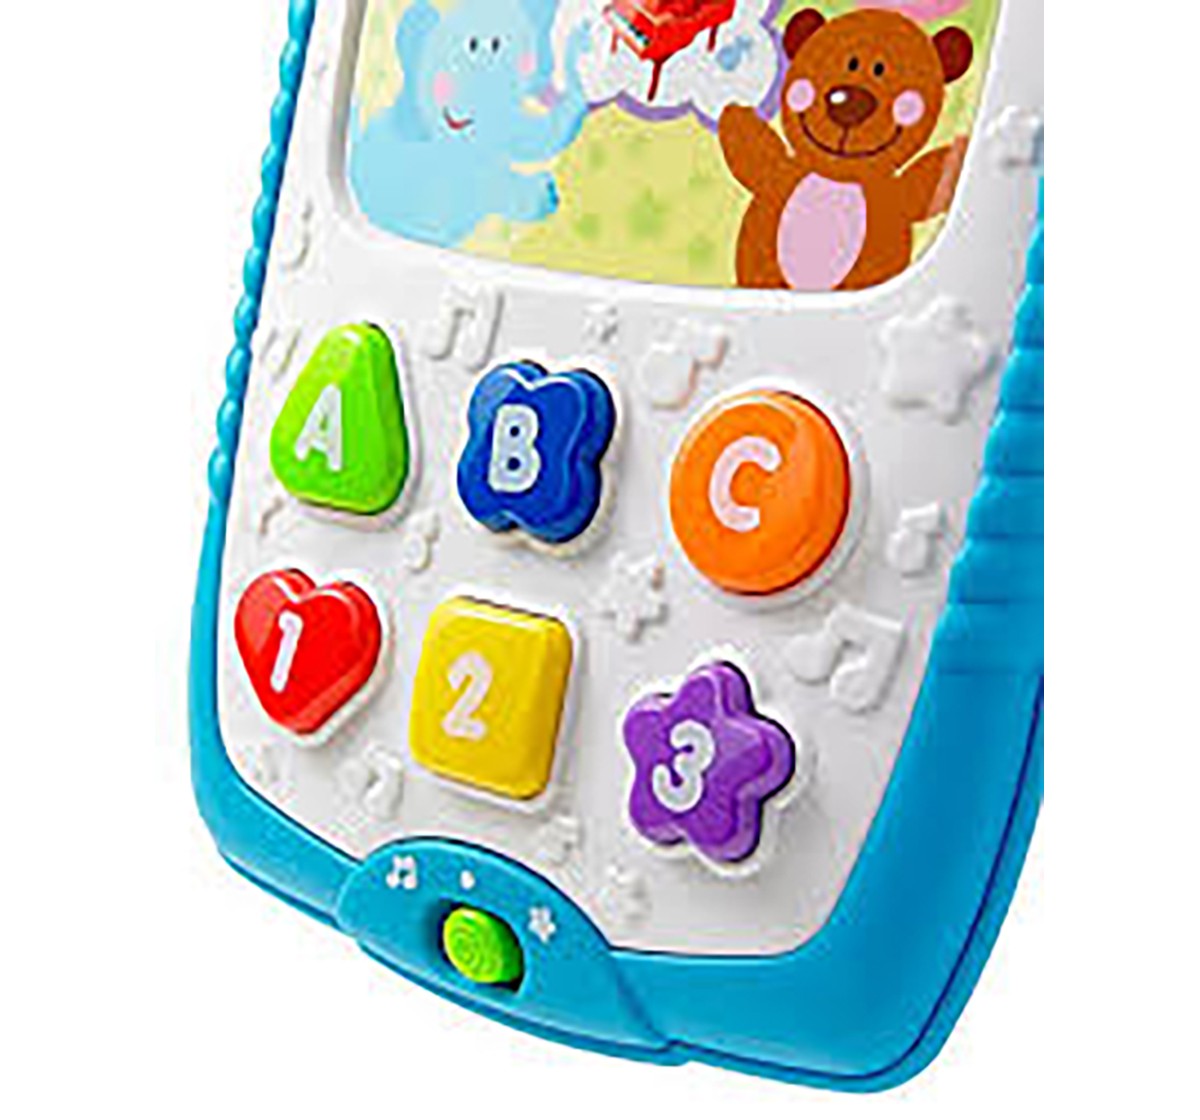 Winfun - Baby'S Learning Pad Toys for Kids age 6M+ 